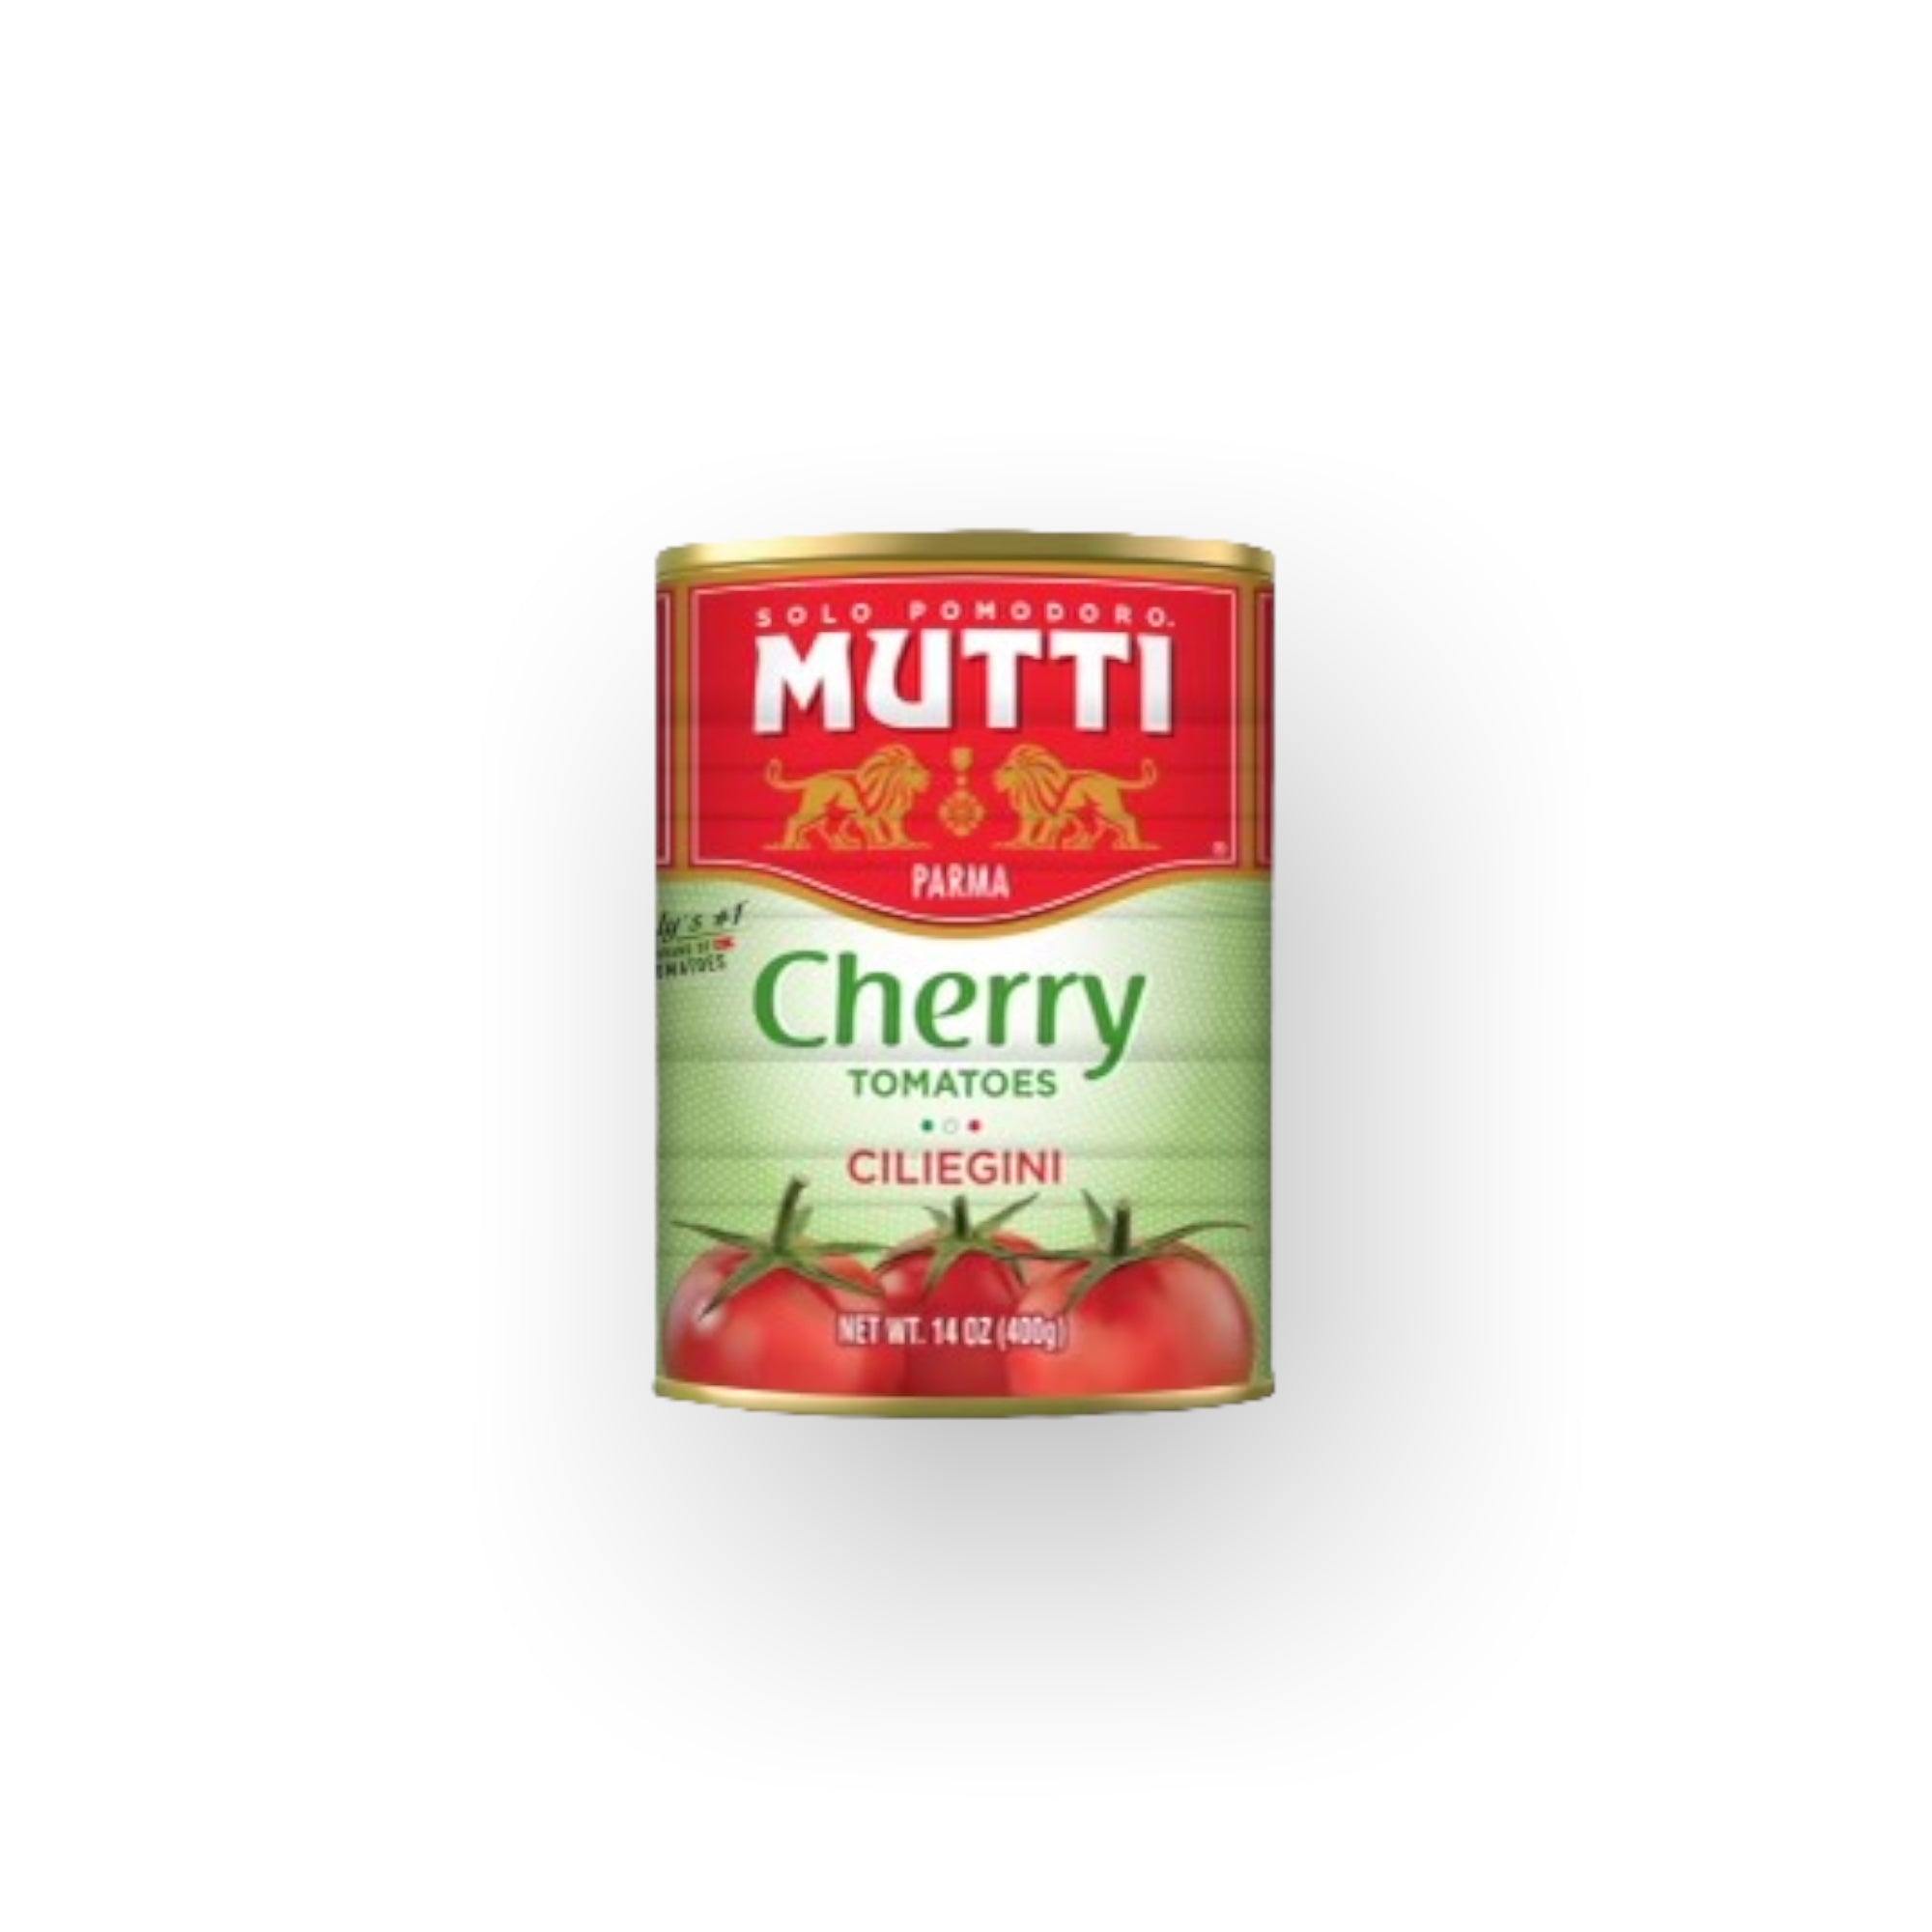 Mutti Cherry Tomatoes is 14oz